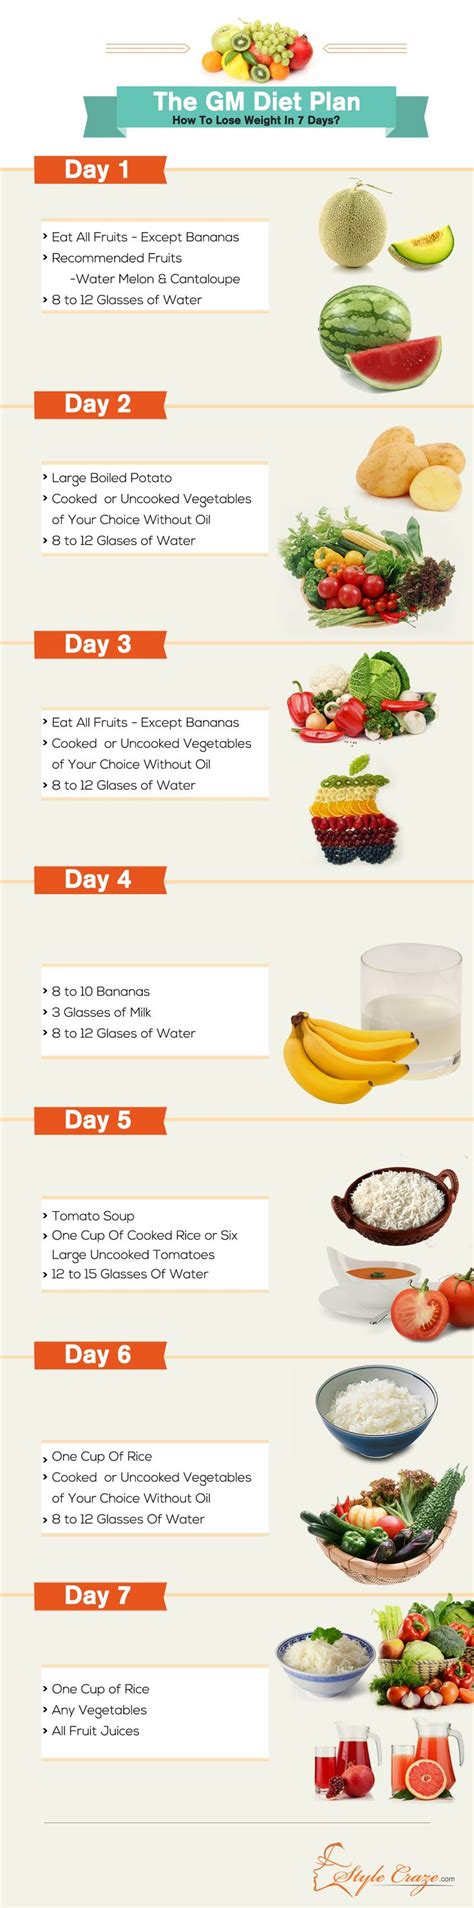 7 diet plan to lose weight fast | Fotolip.com Rich image ...